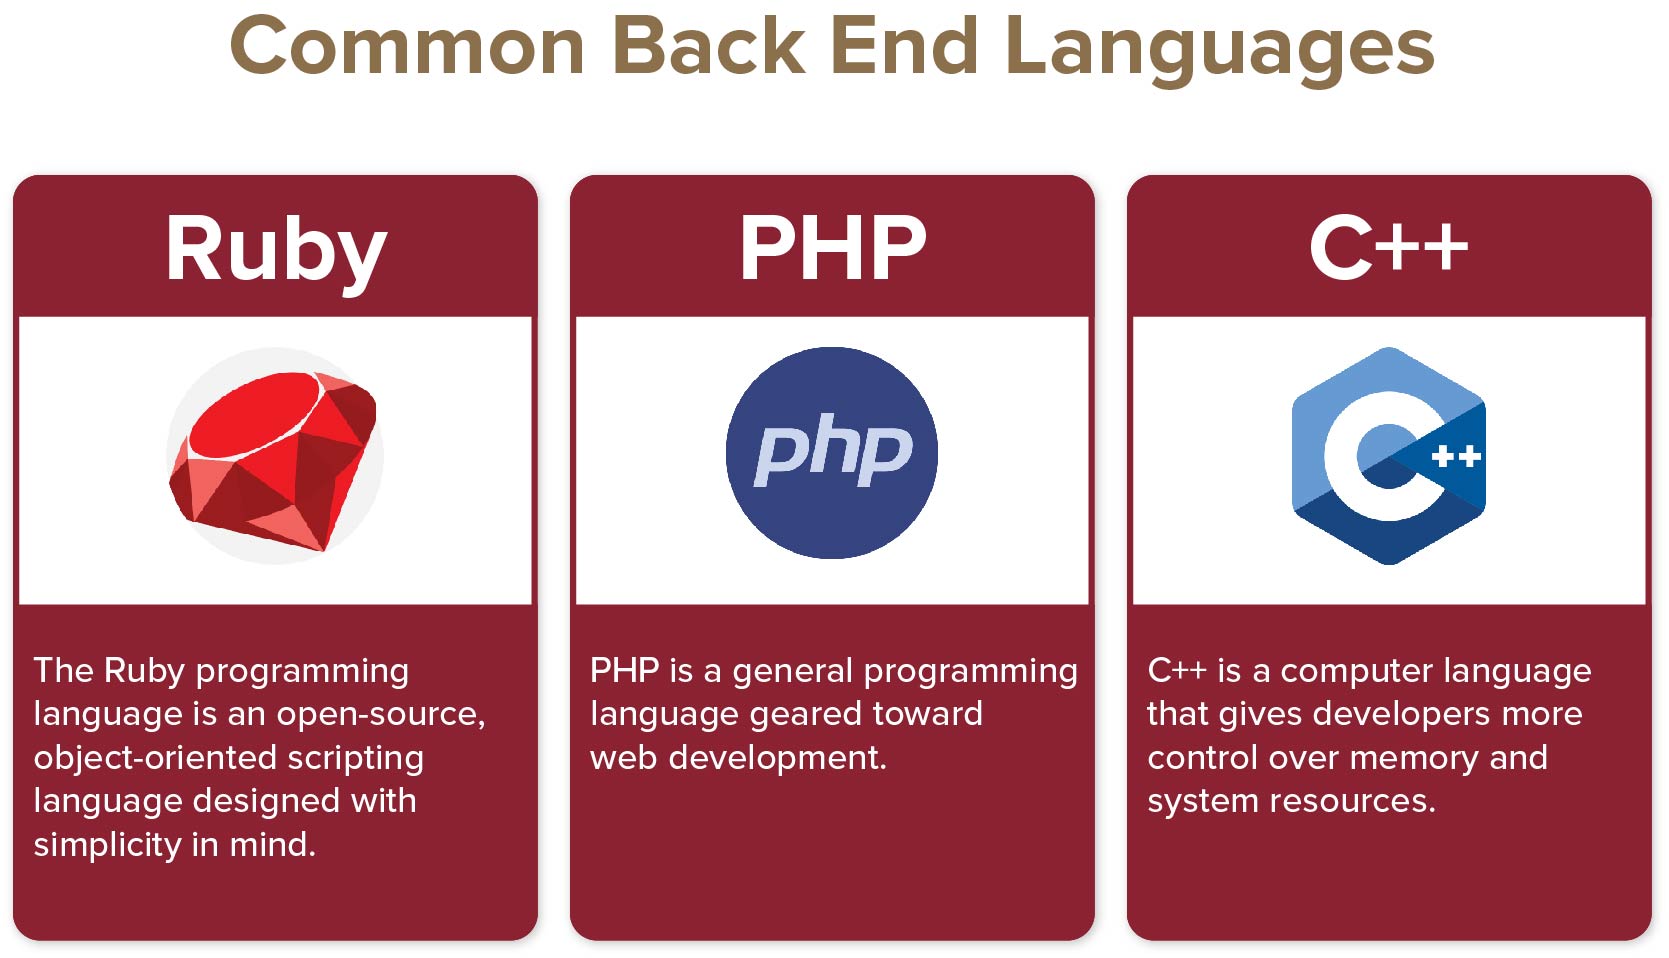 An image highlighting the three common back end languages mentioned in the article.